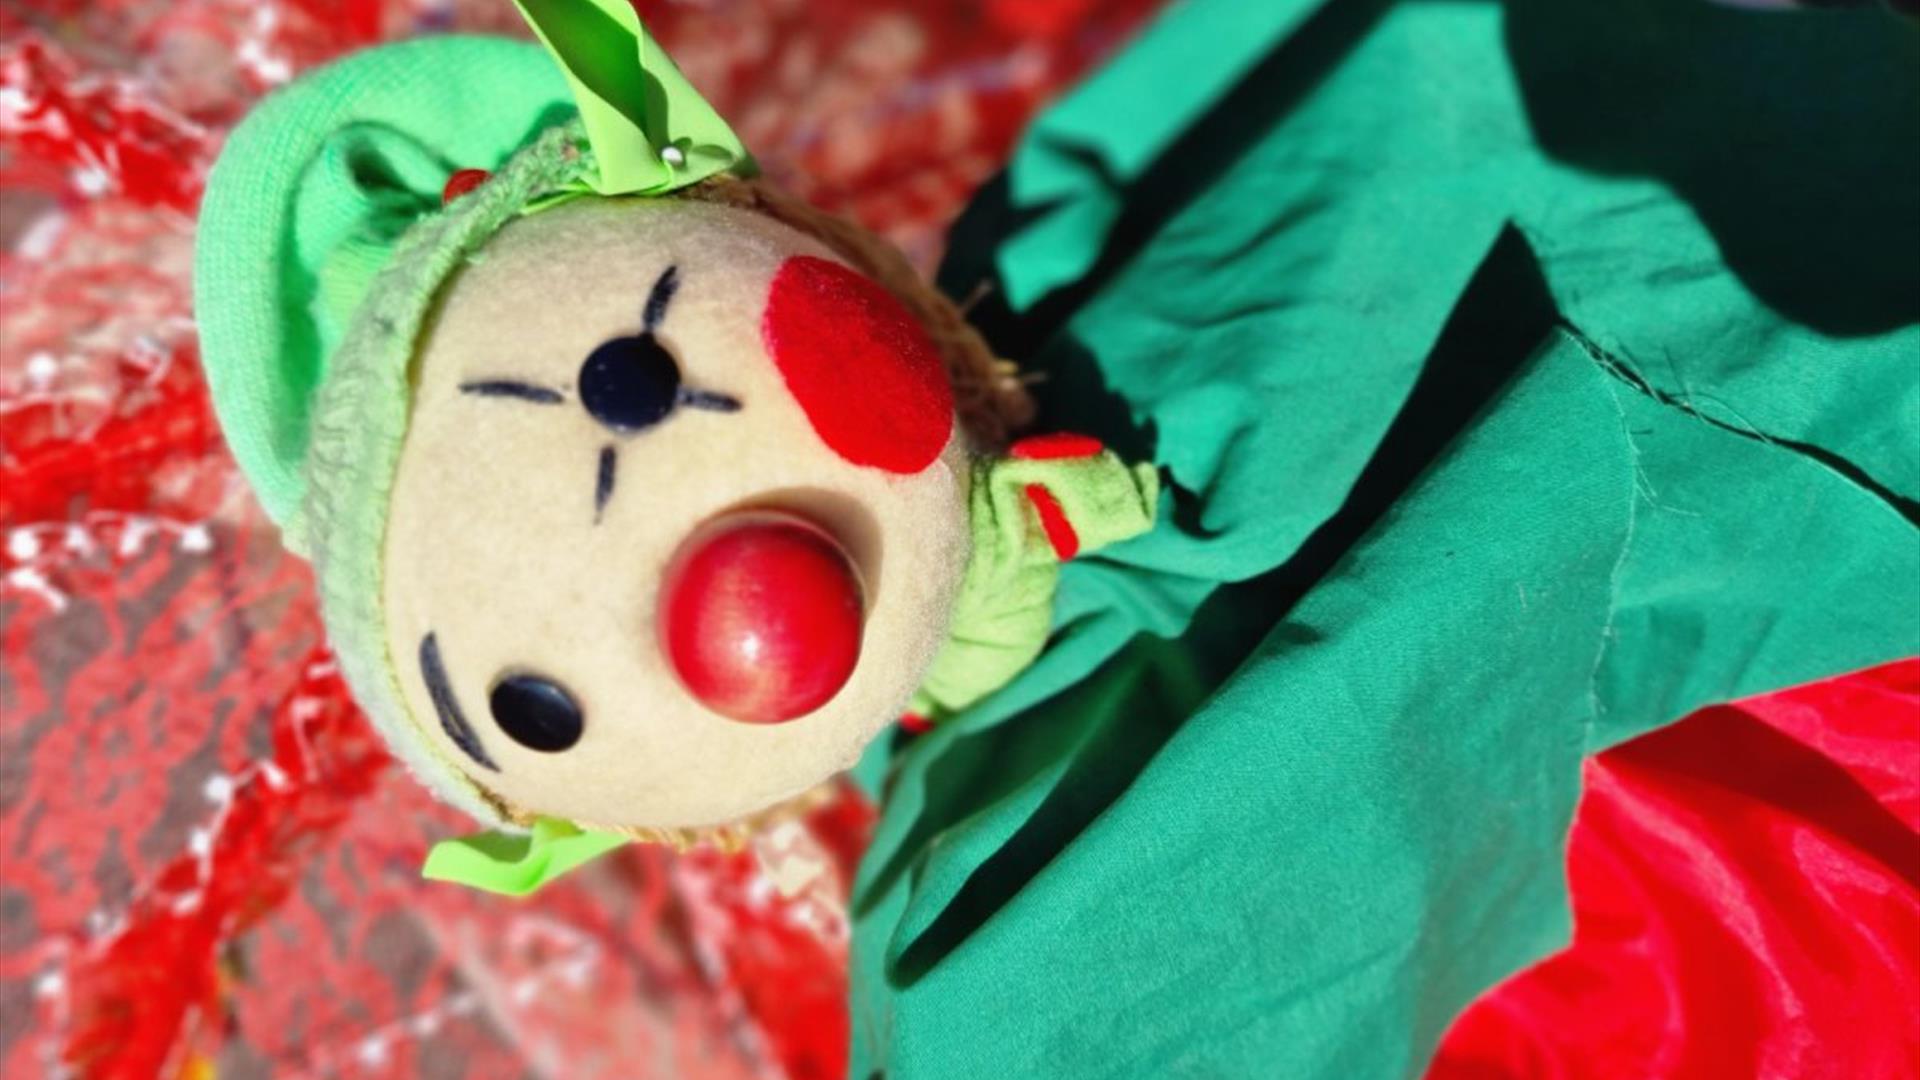 Christmas Elf puppet with a green hat, rosy cheeks and a red nose